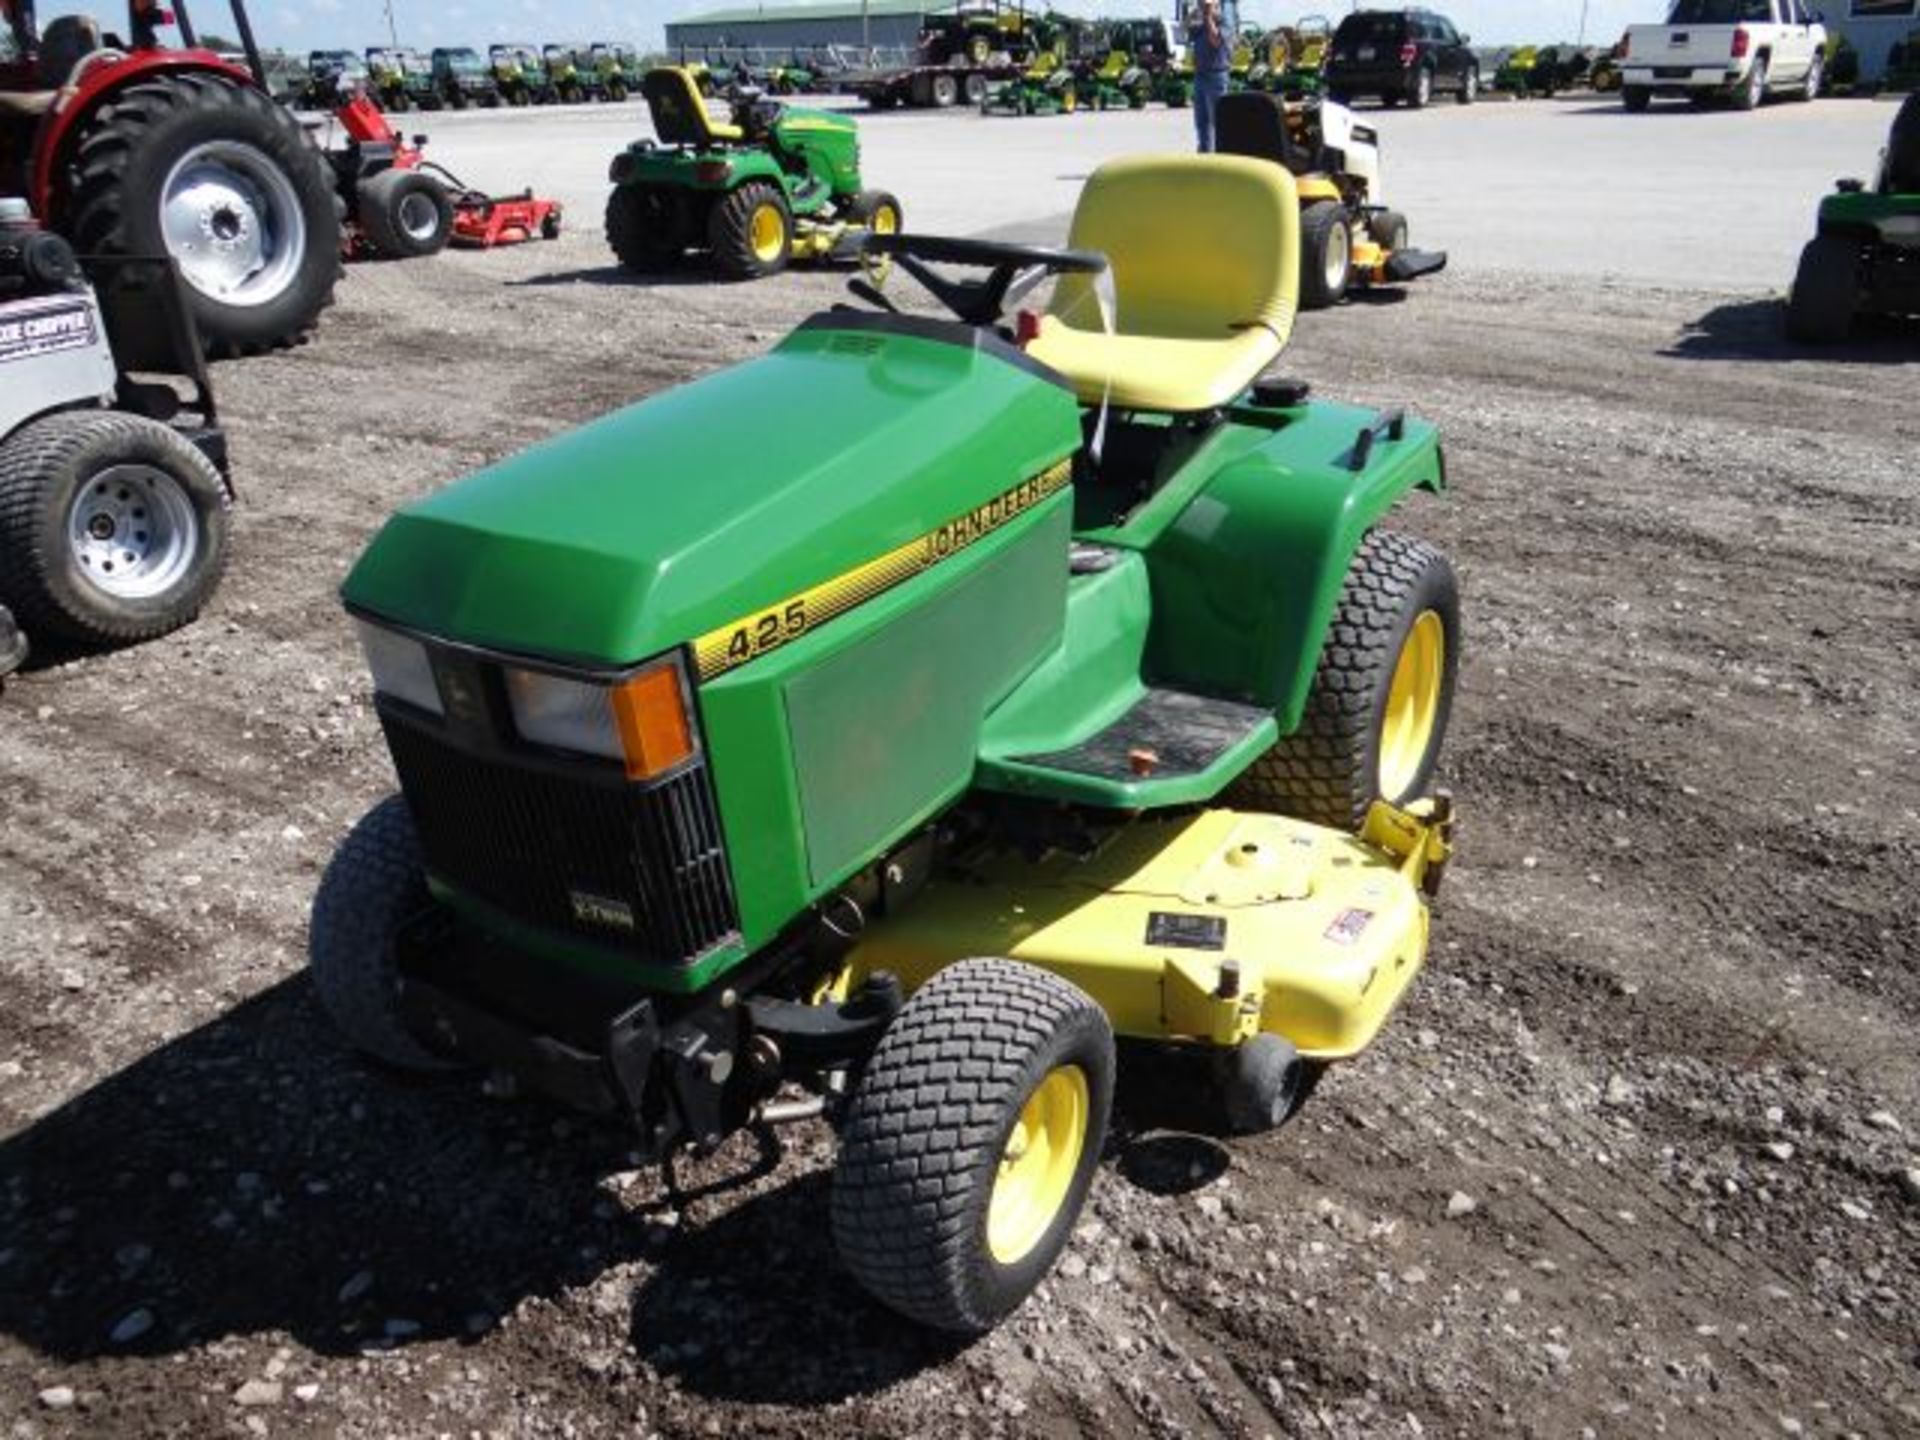 Lot 23333 - 1994 JD 425/54 Mower 1431 hrs, 20hp, Kawasaki, Water Cooled, Hydro, Power Steer, Diff - Image 2 of 4